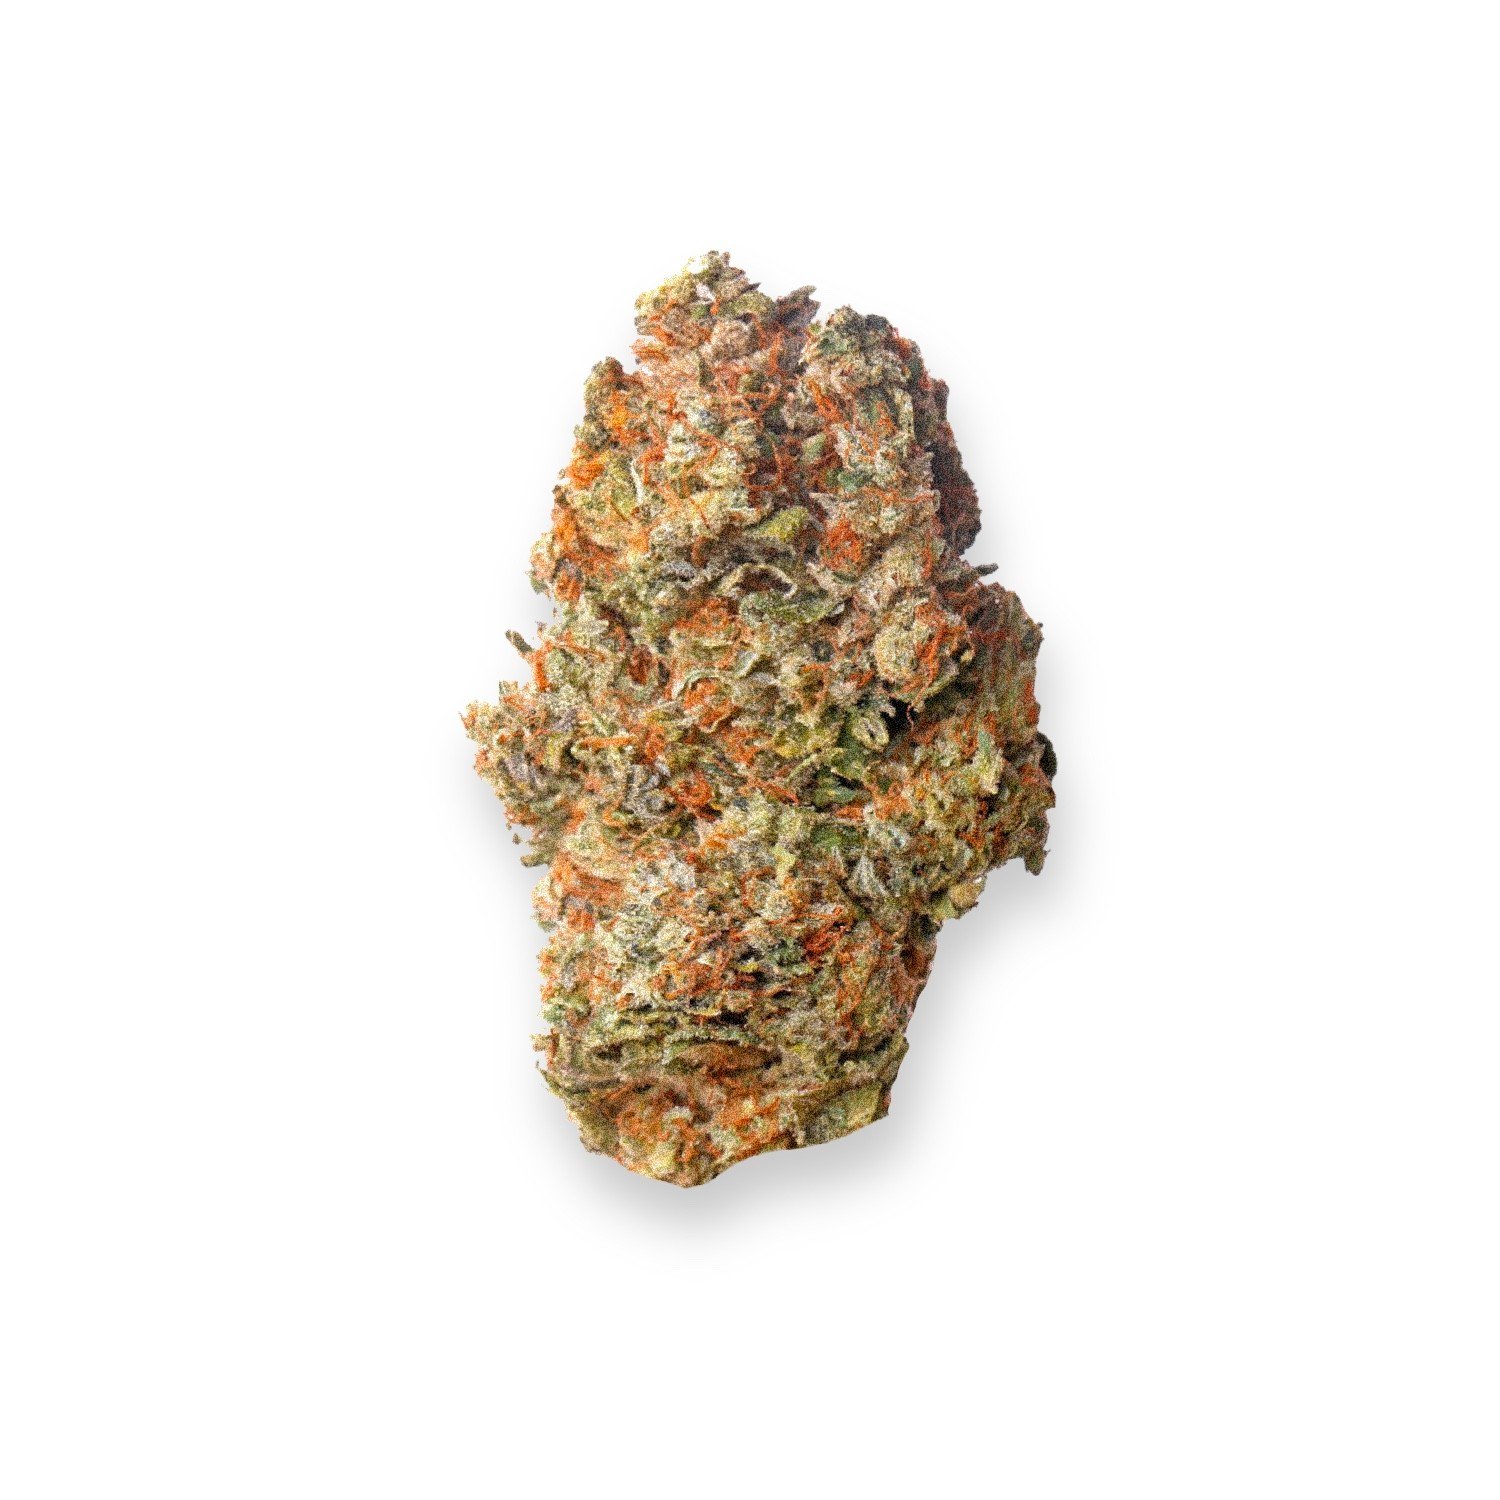 ACDC Strain Review